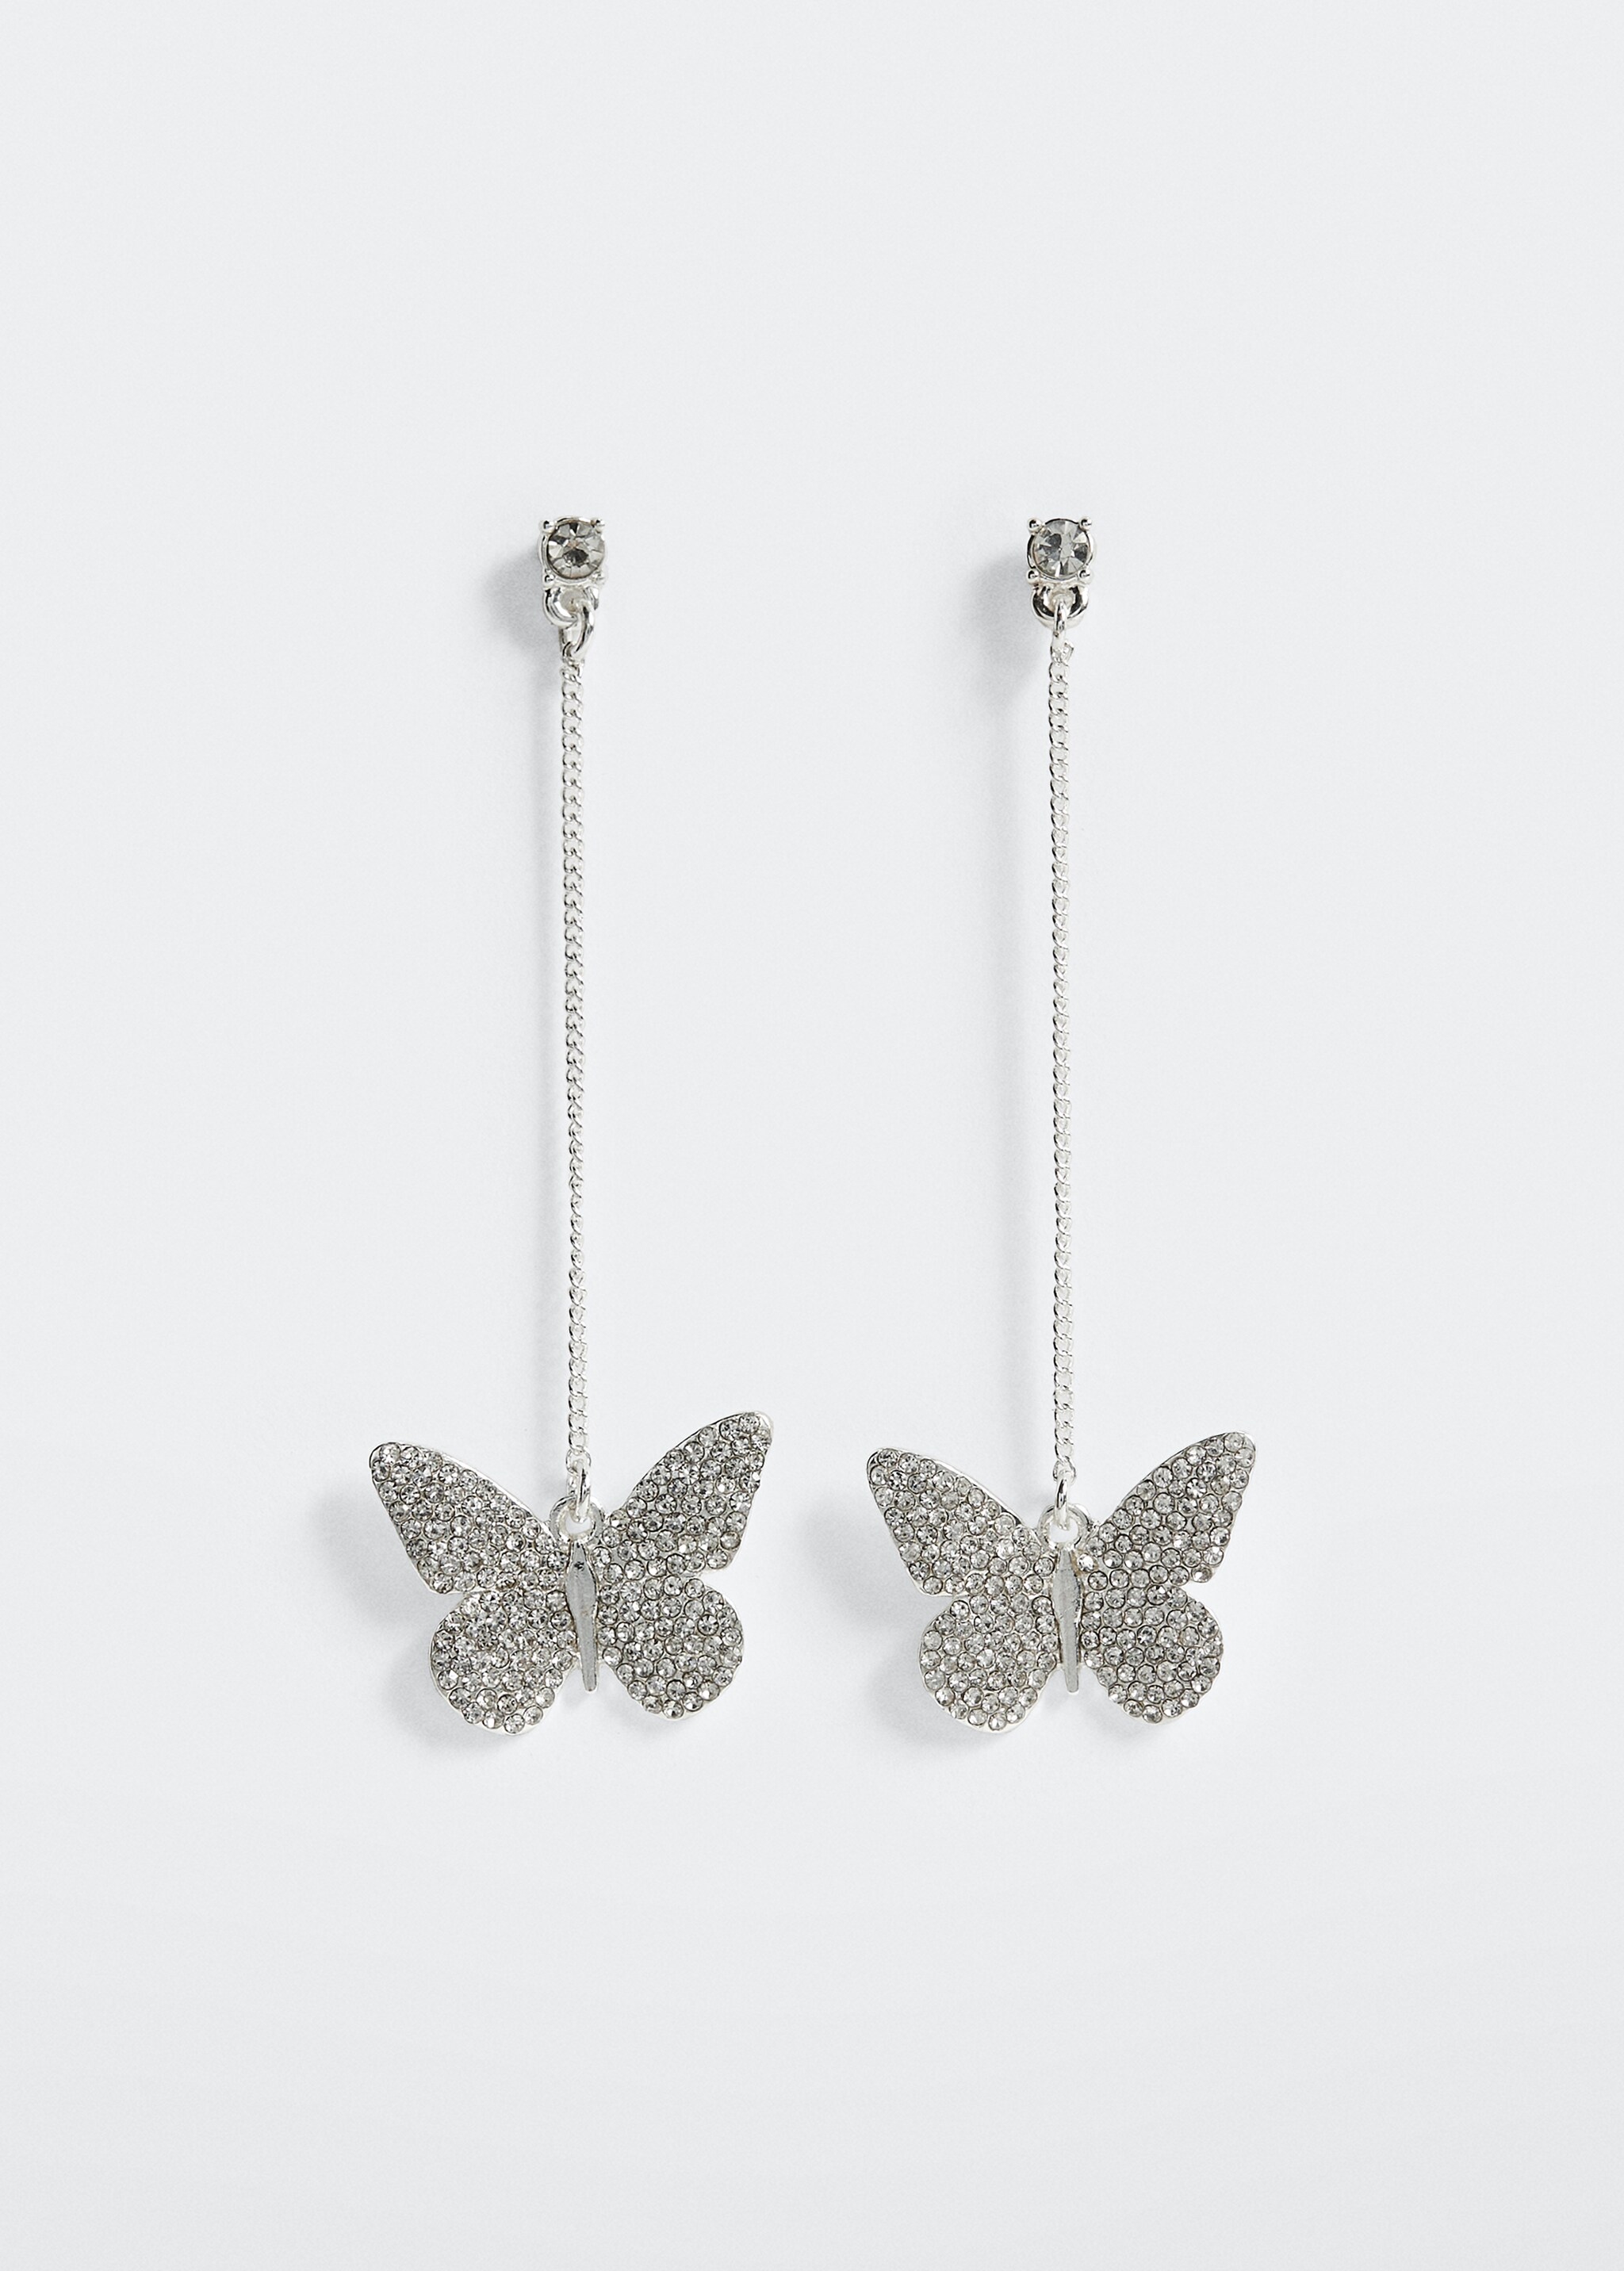 Butterfly earrings - Article without model